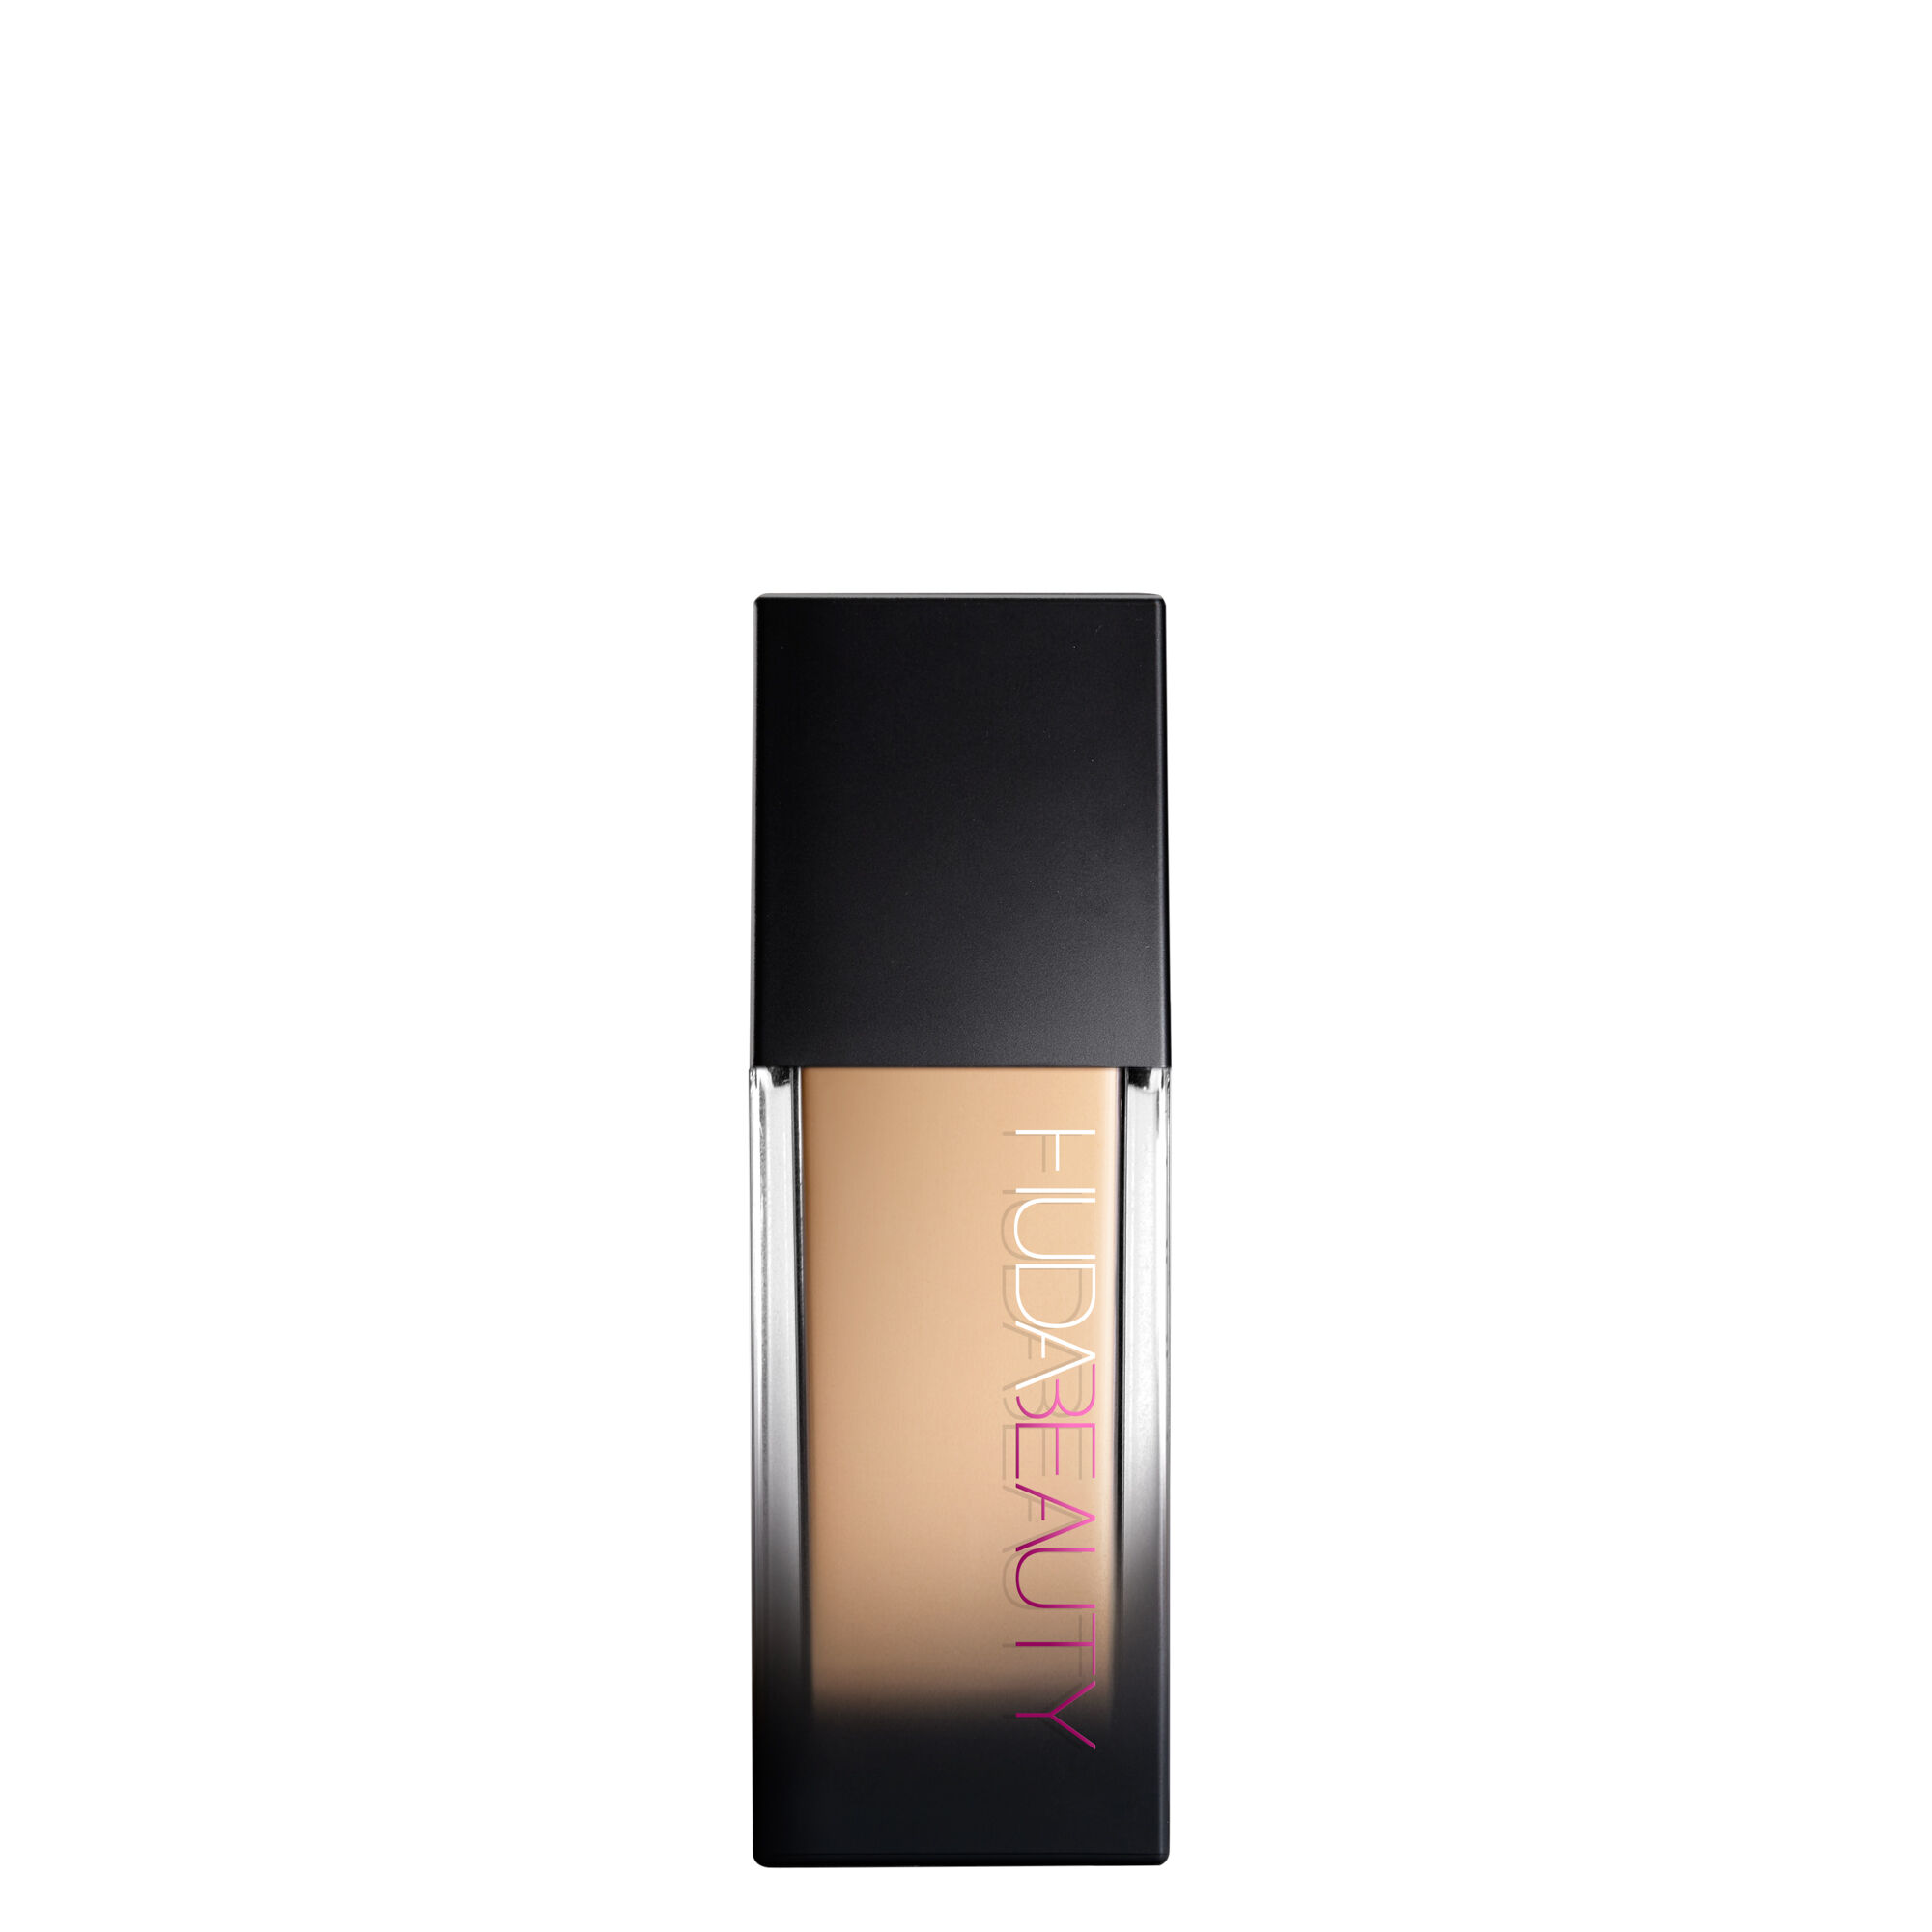 Huda Beauty #fauxfilter Luminous Matte Foundation Toasted Coconut 240n